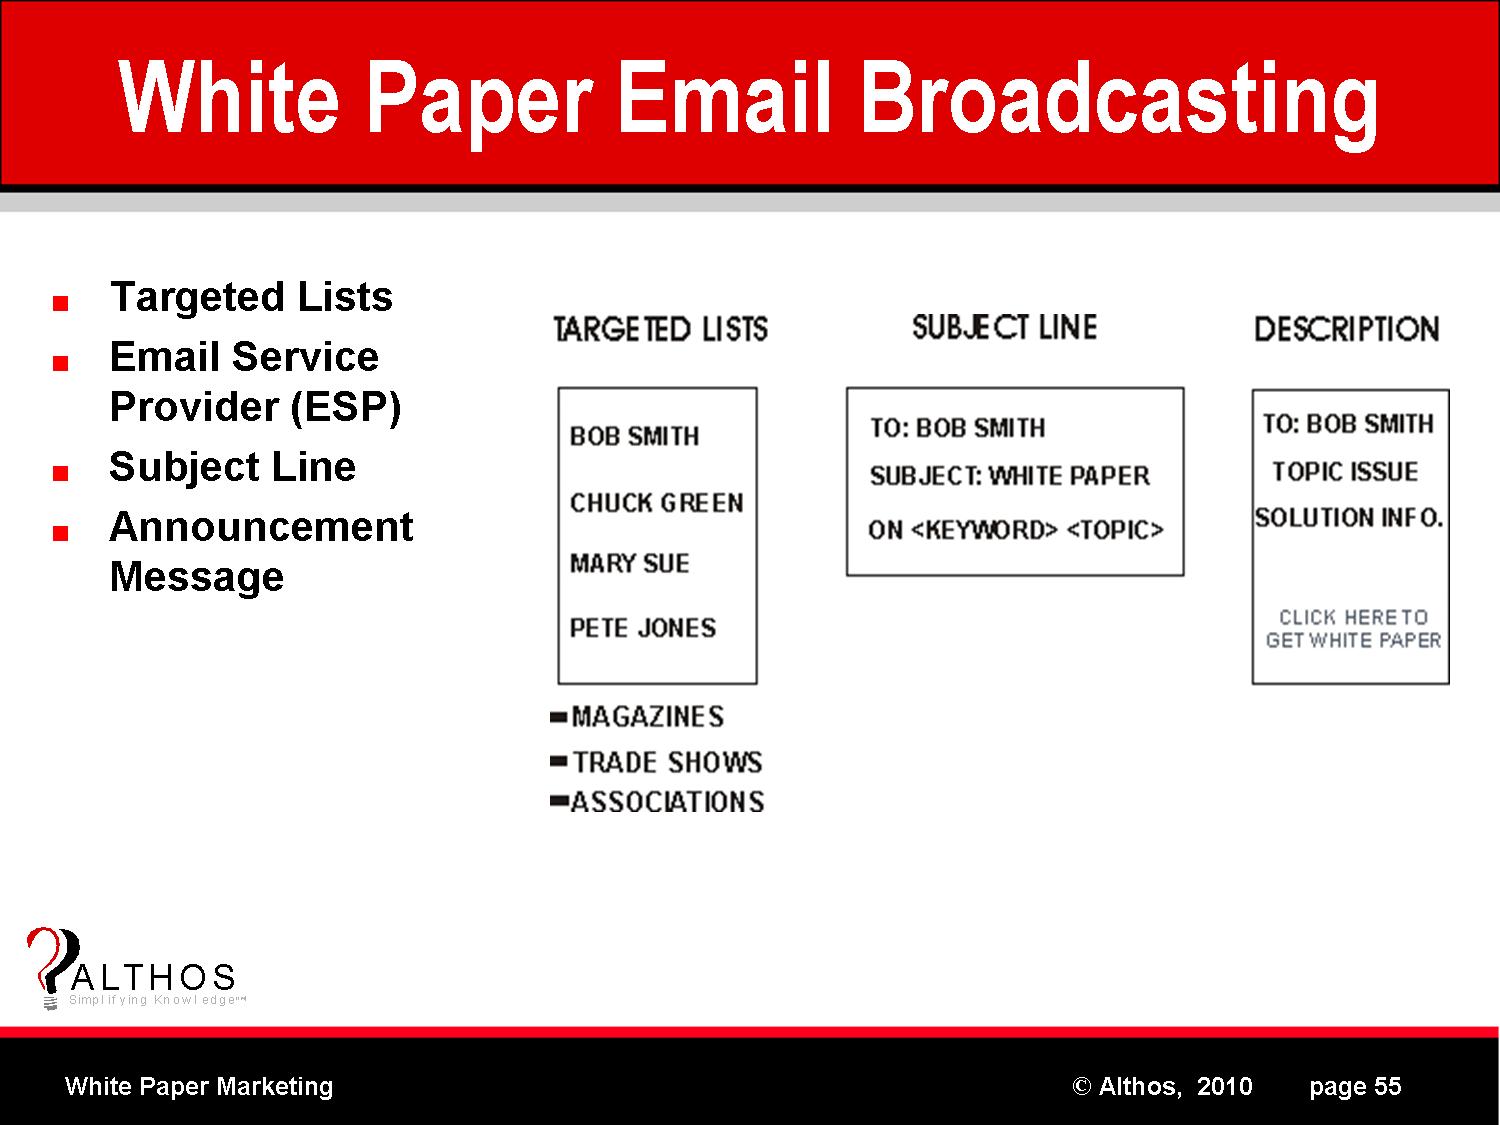 White Paper Email Broadcasting